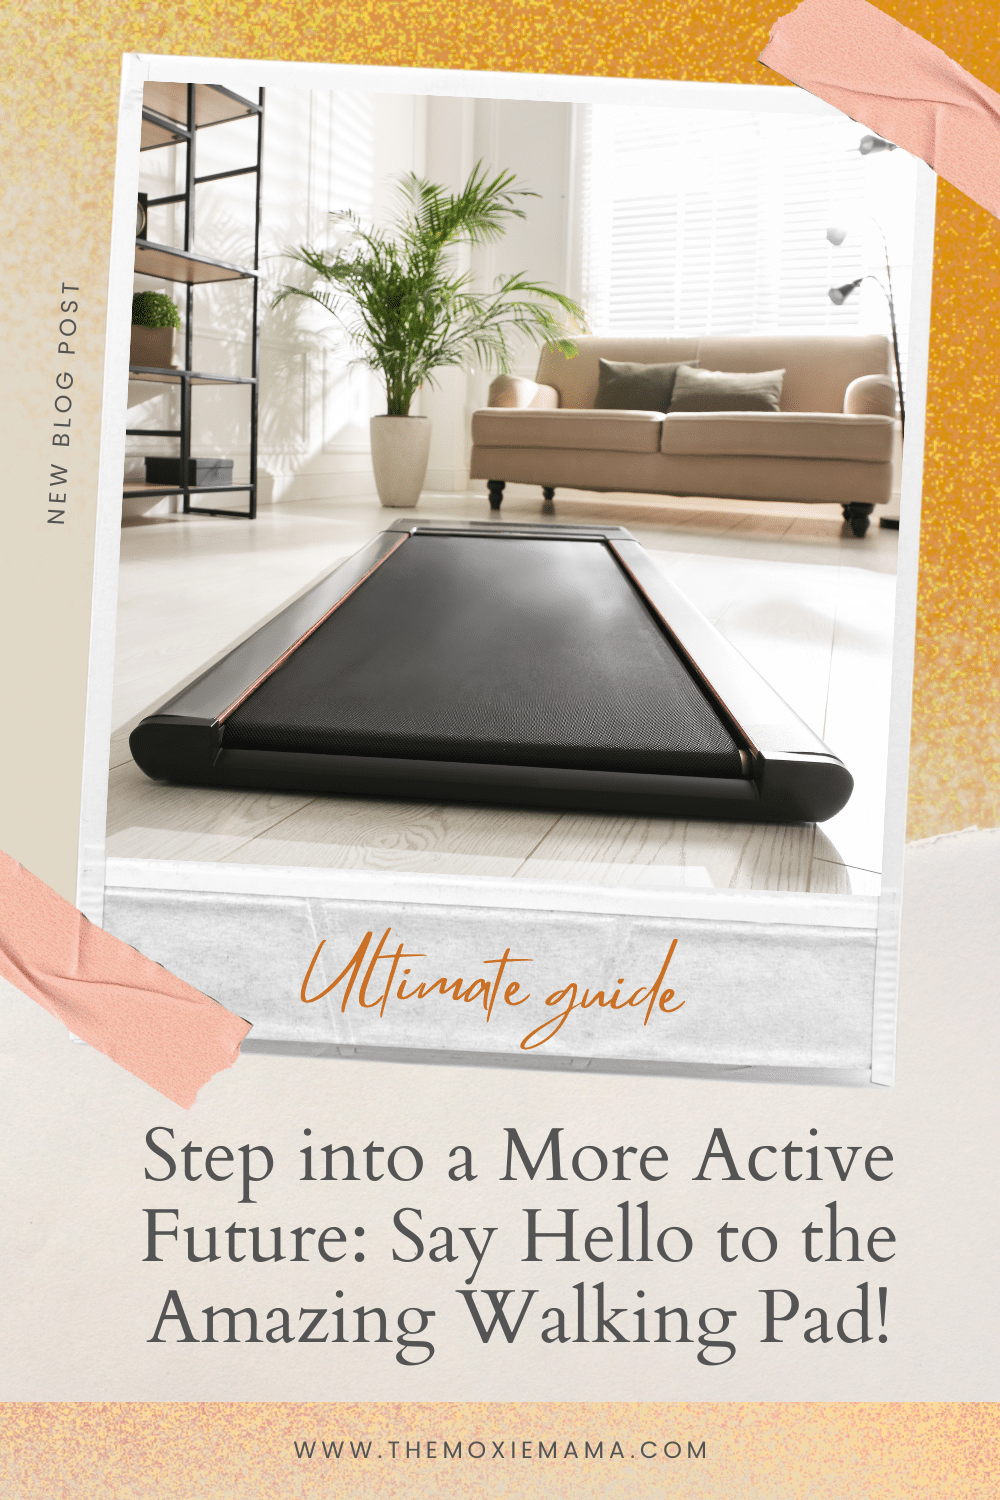 Explore what a walking pad is, the benefits it offers compared to traditional treadmills, and how it can be a game-changer for remote workers. Continue reading at themoxiemama.com